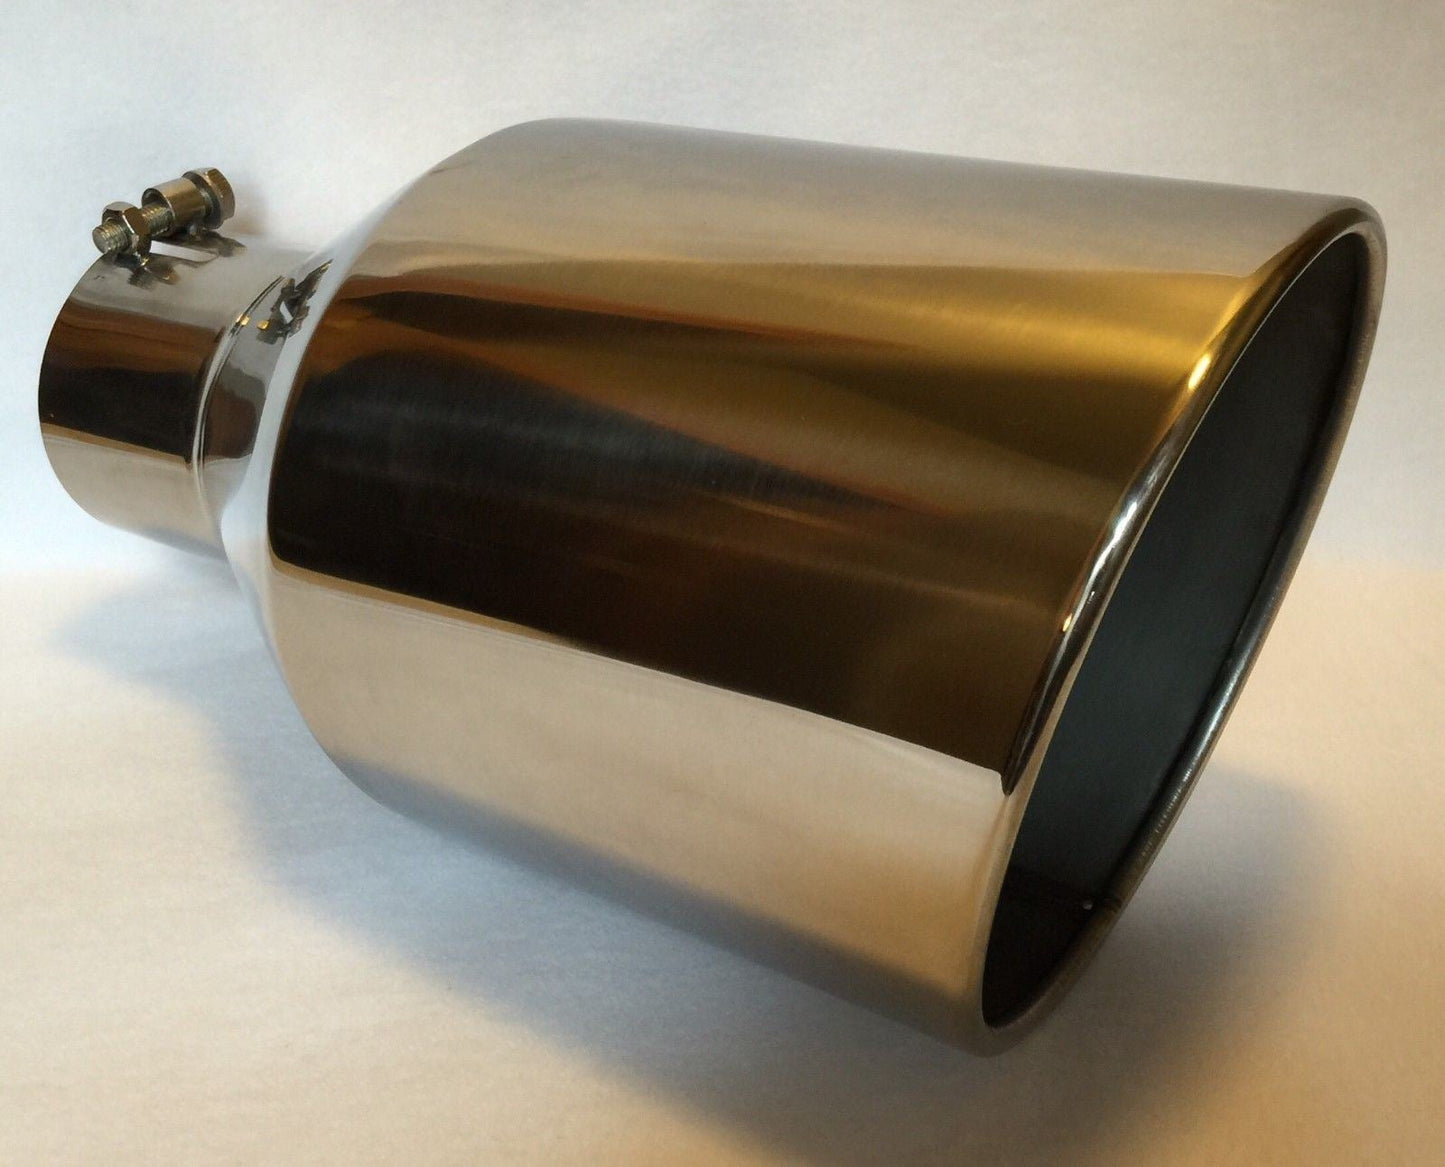 CHEVY DURAMAX 6.6L 4" IN x 8" OUT x 15" LONG POLISHED STAINLESS EXHAUST TIP